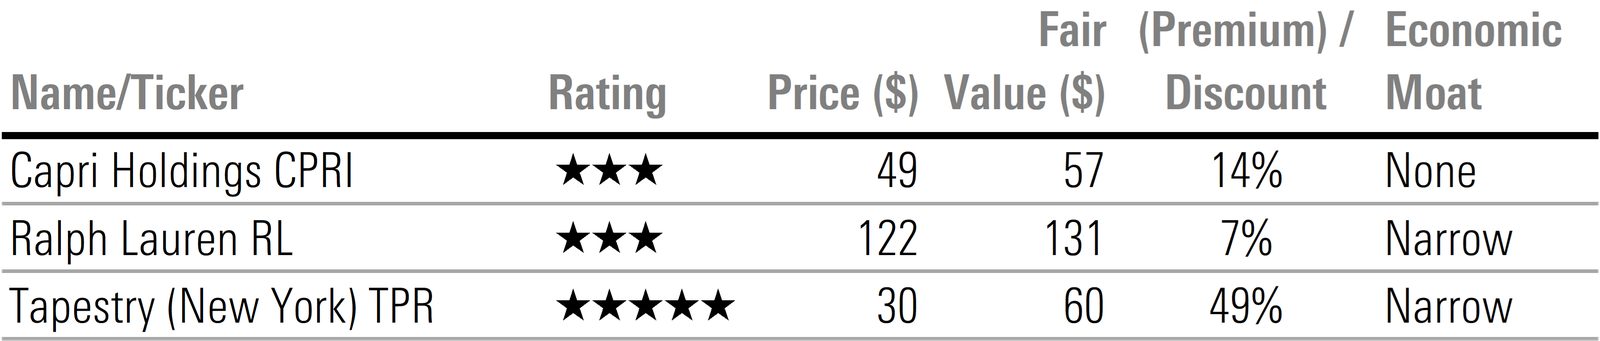 Table displaying star rating, price, fair value, premium or discount, and economic moat rating for stocks under Morningstar coverage in the luxury sector.